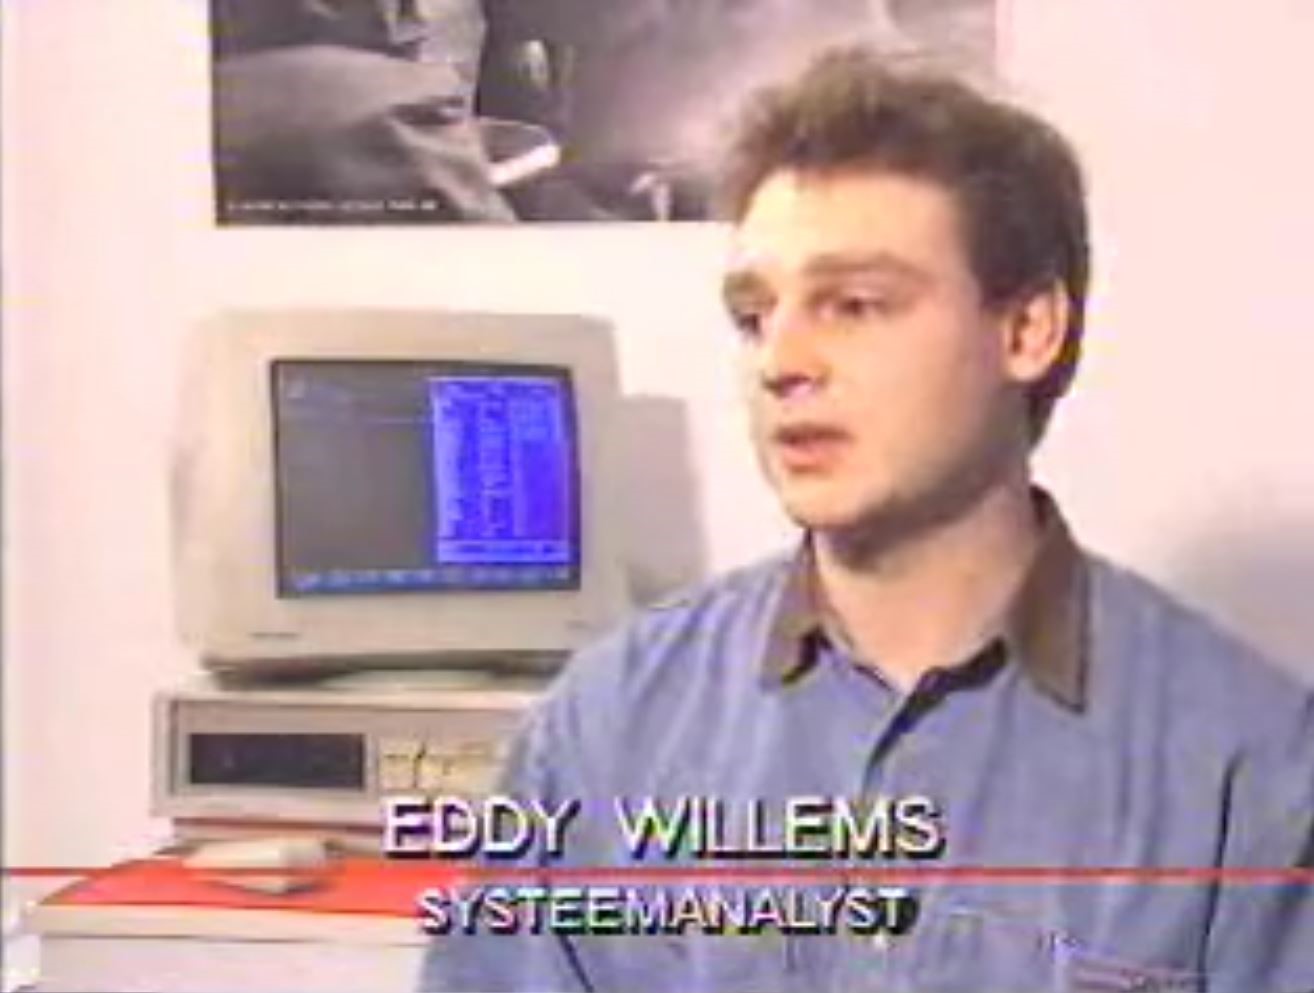 First interview in 1989 by VTM Nieuws. (Source: private)